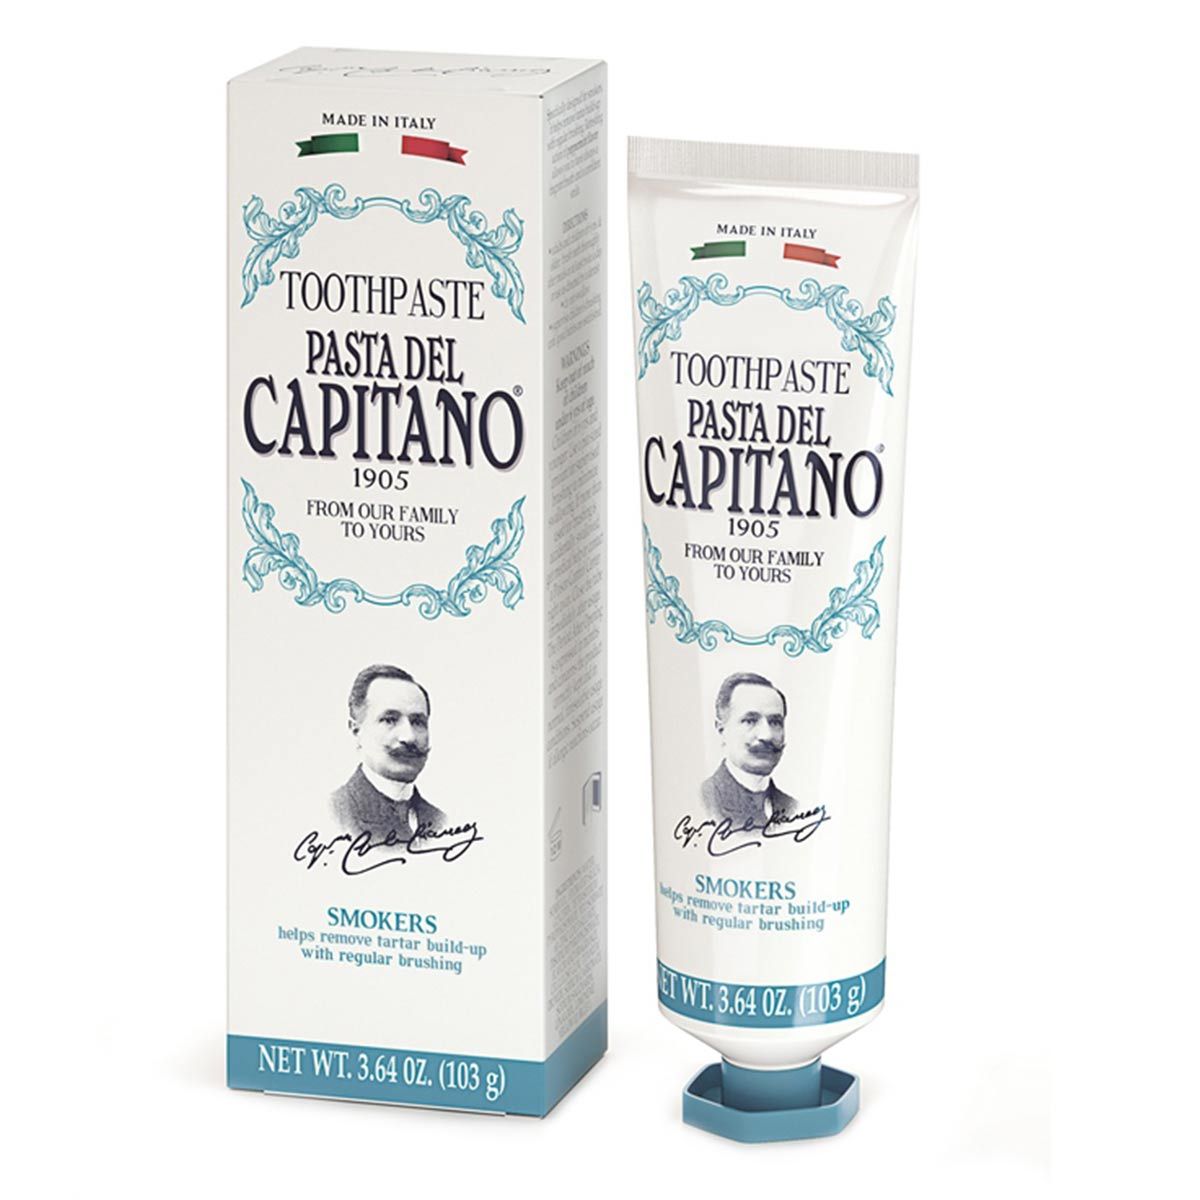 Primary image of Smoker's Toothpaste